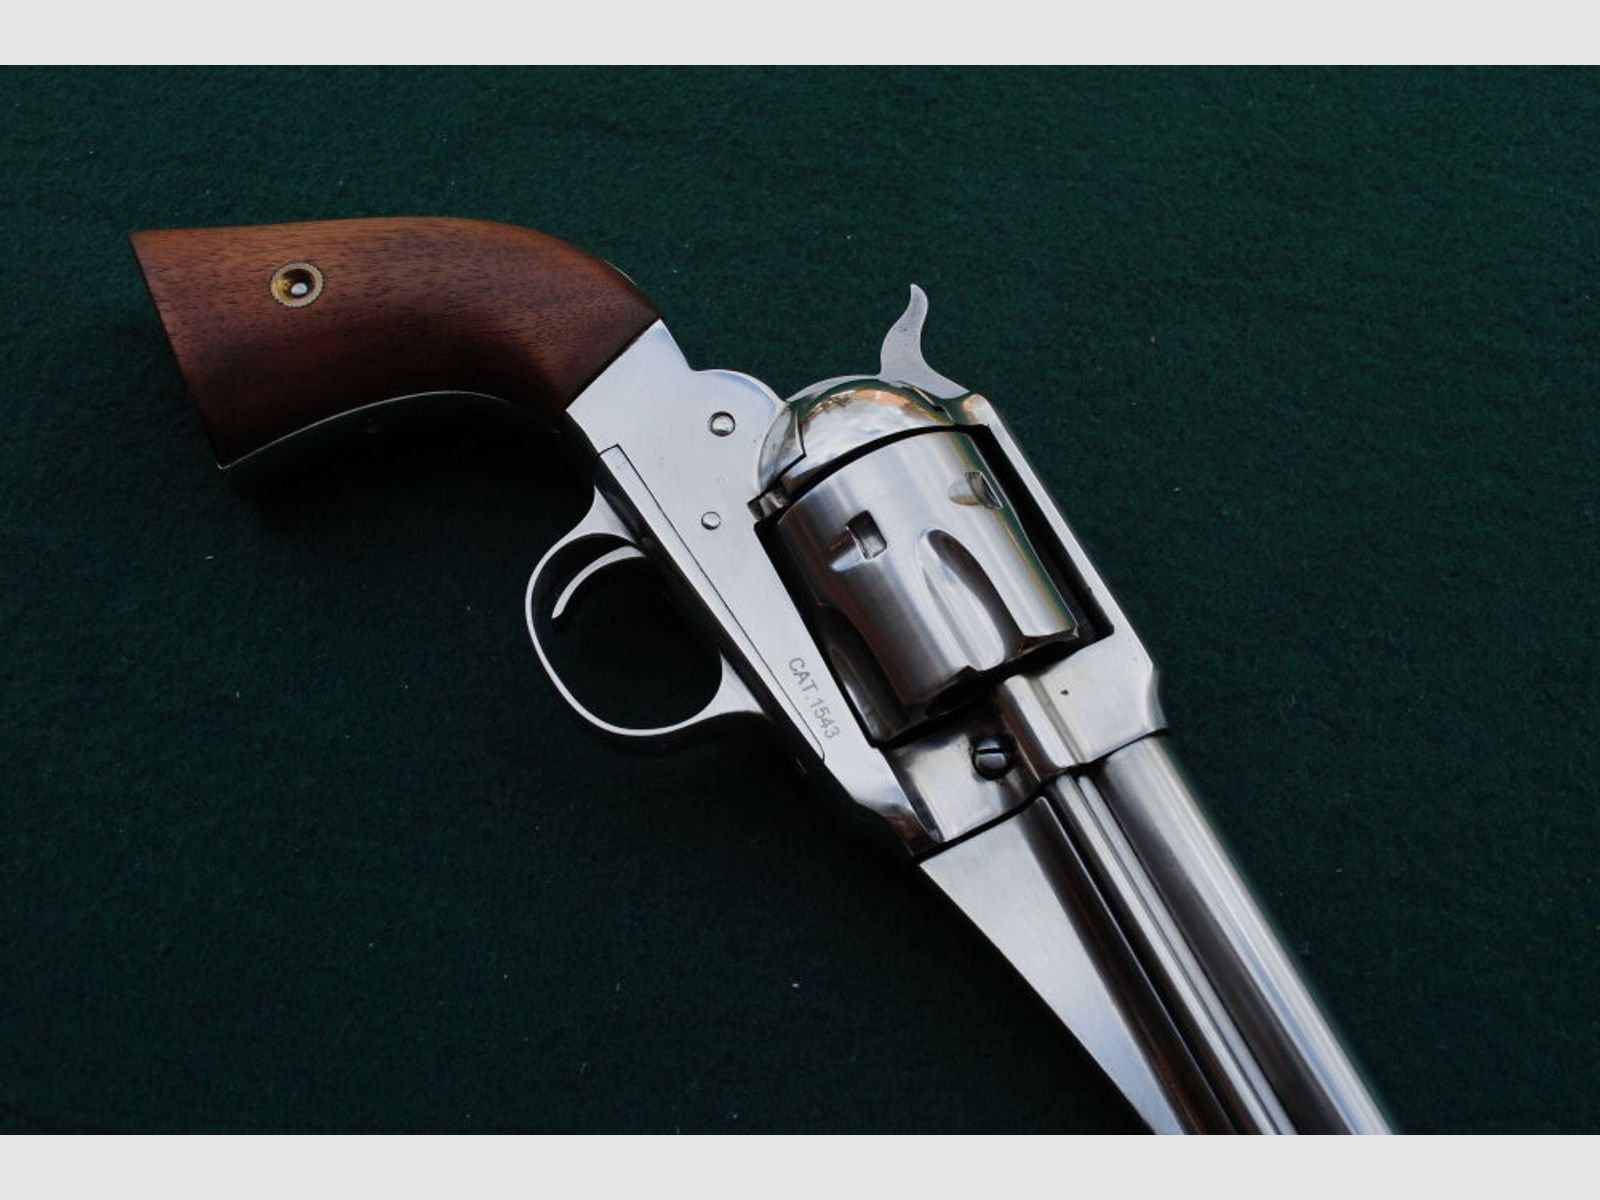 Hege Uberti Remington 1875 Outlaw, Hochglanz Stainless Steel